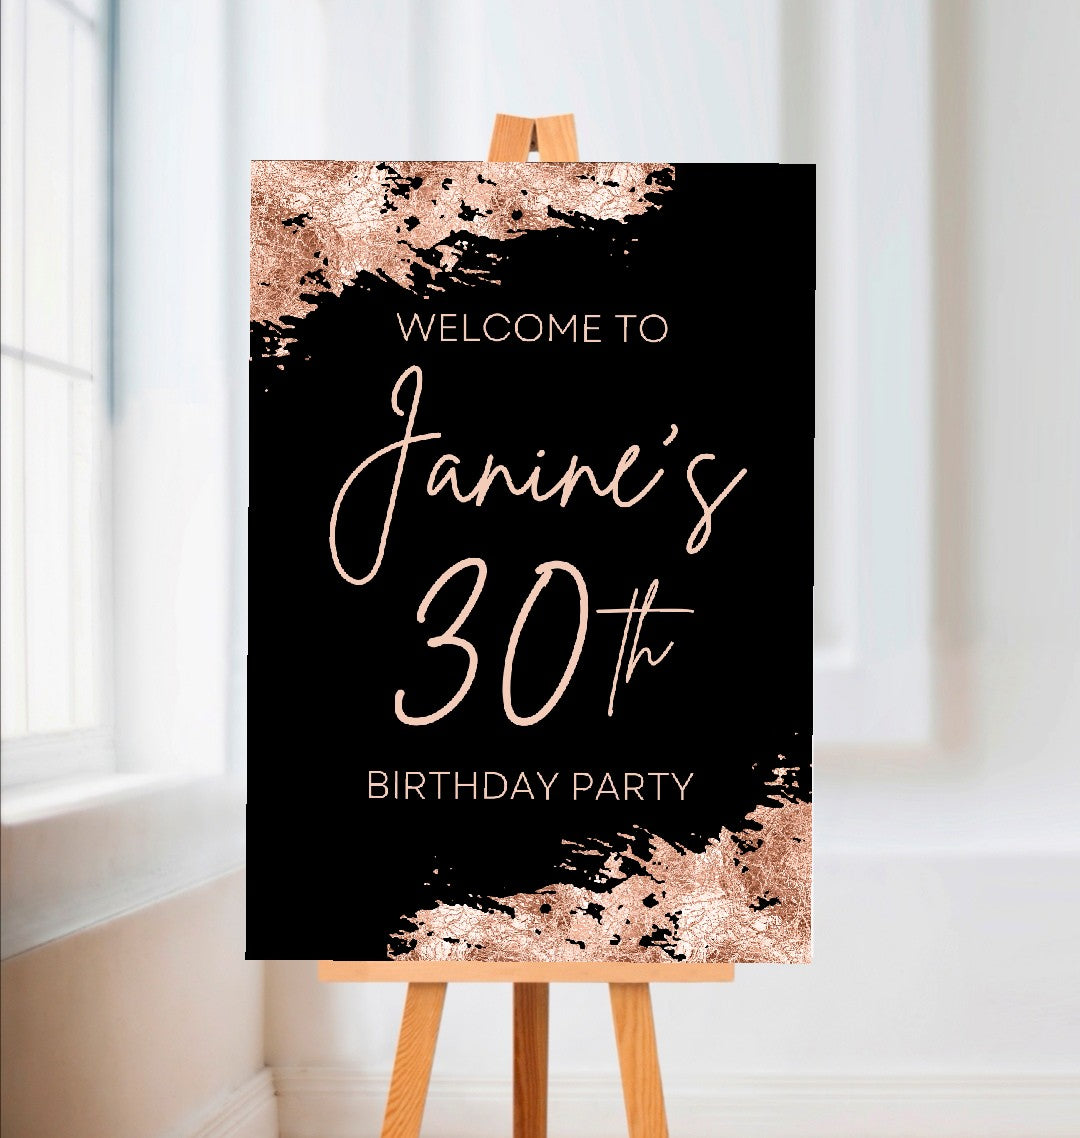 Black & Rose Gold Welcome Board Sign | Personalised Birthday Board | Birthday Party Sign | A4, A3, A2